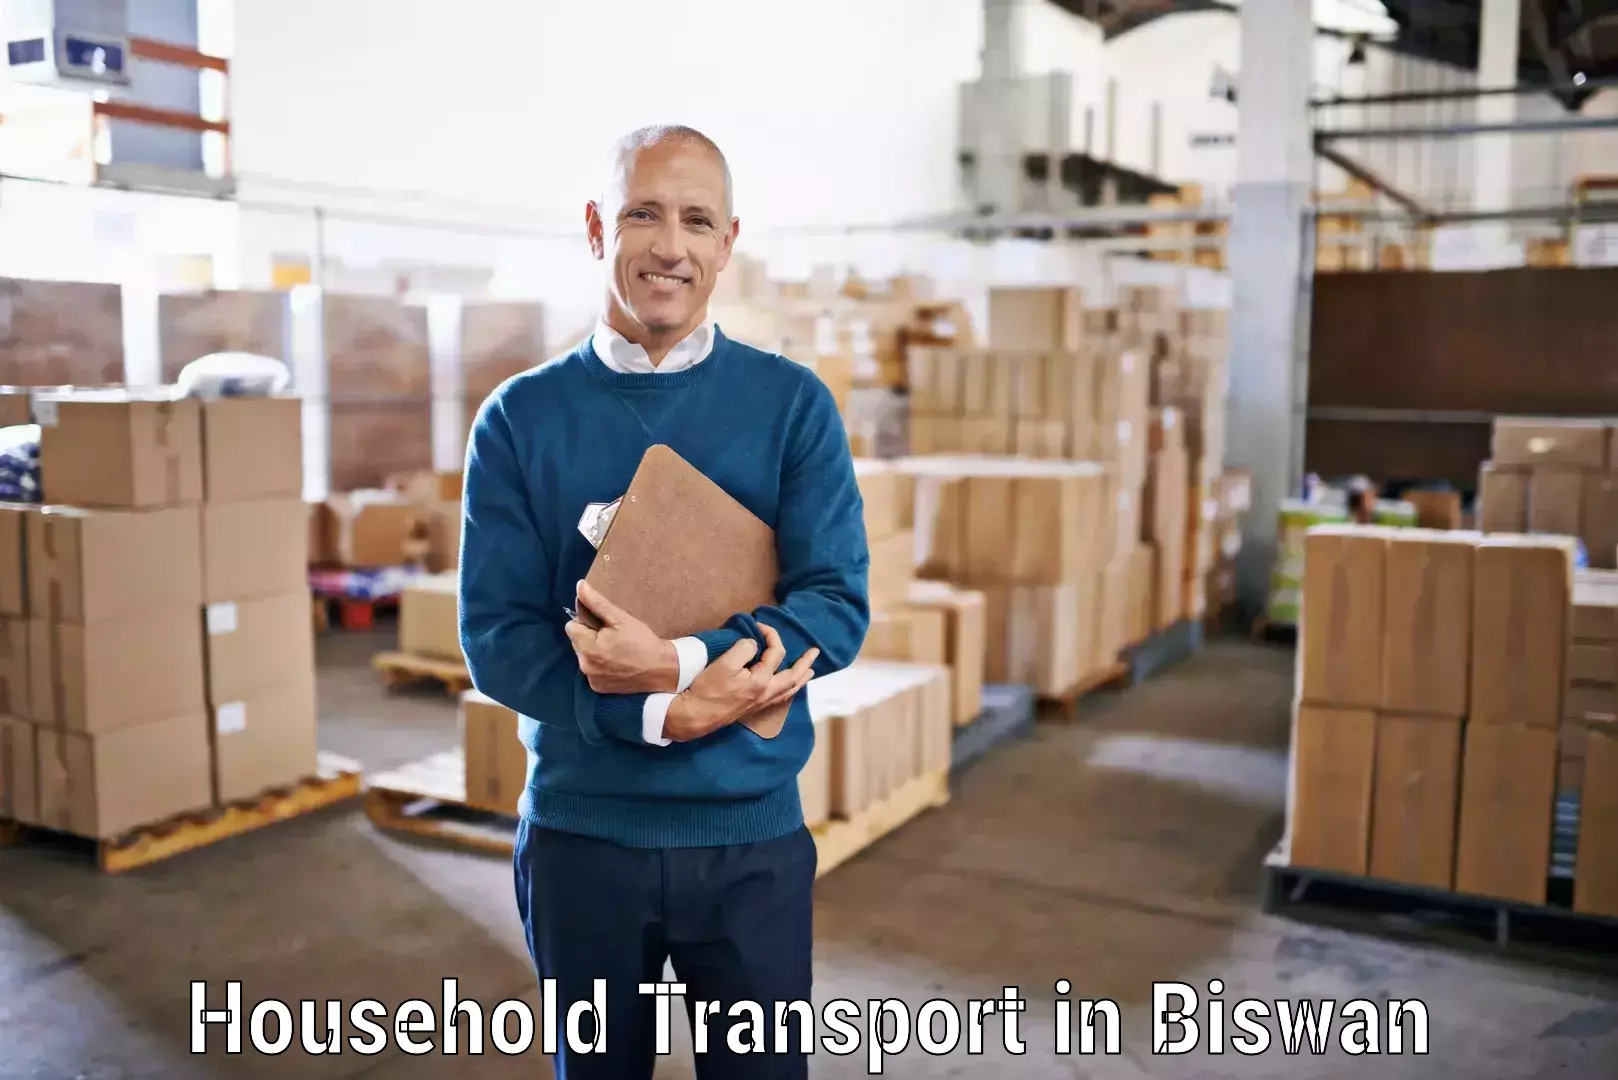 Quality relocation services in Biswan